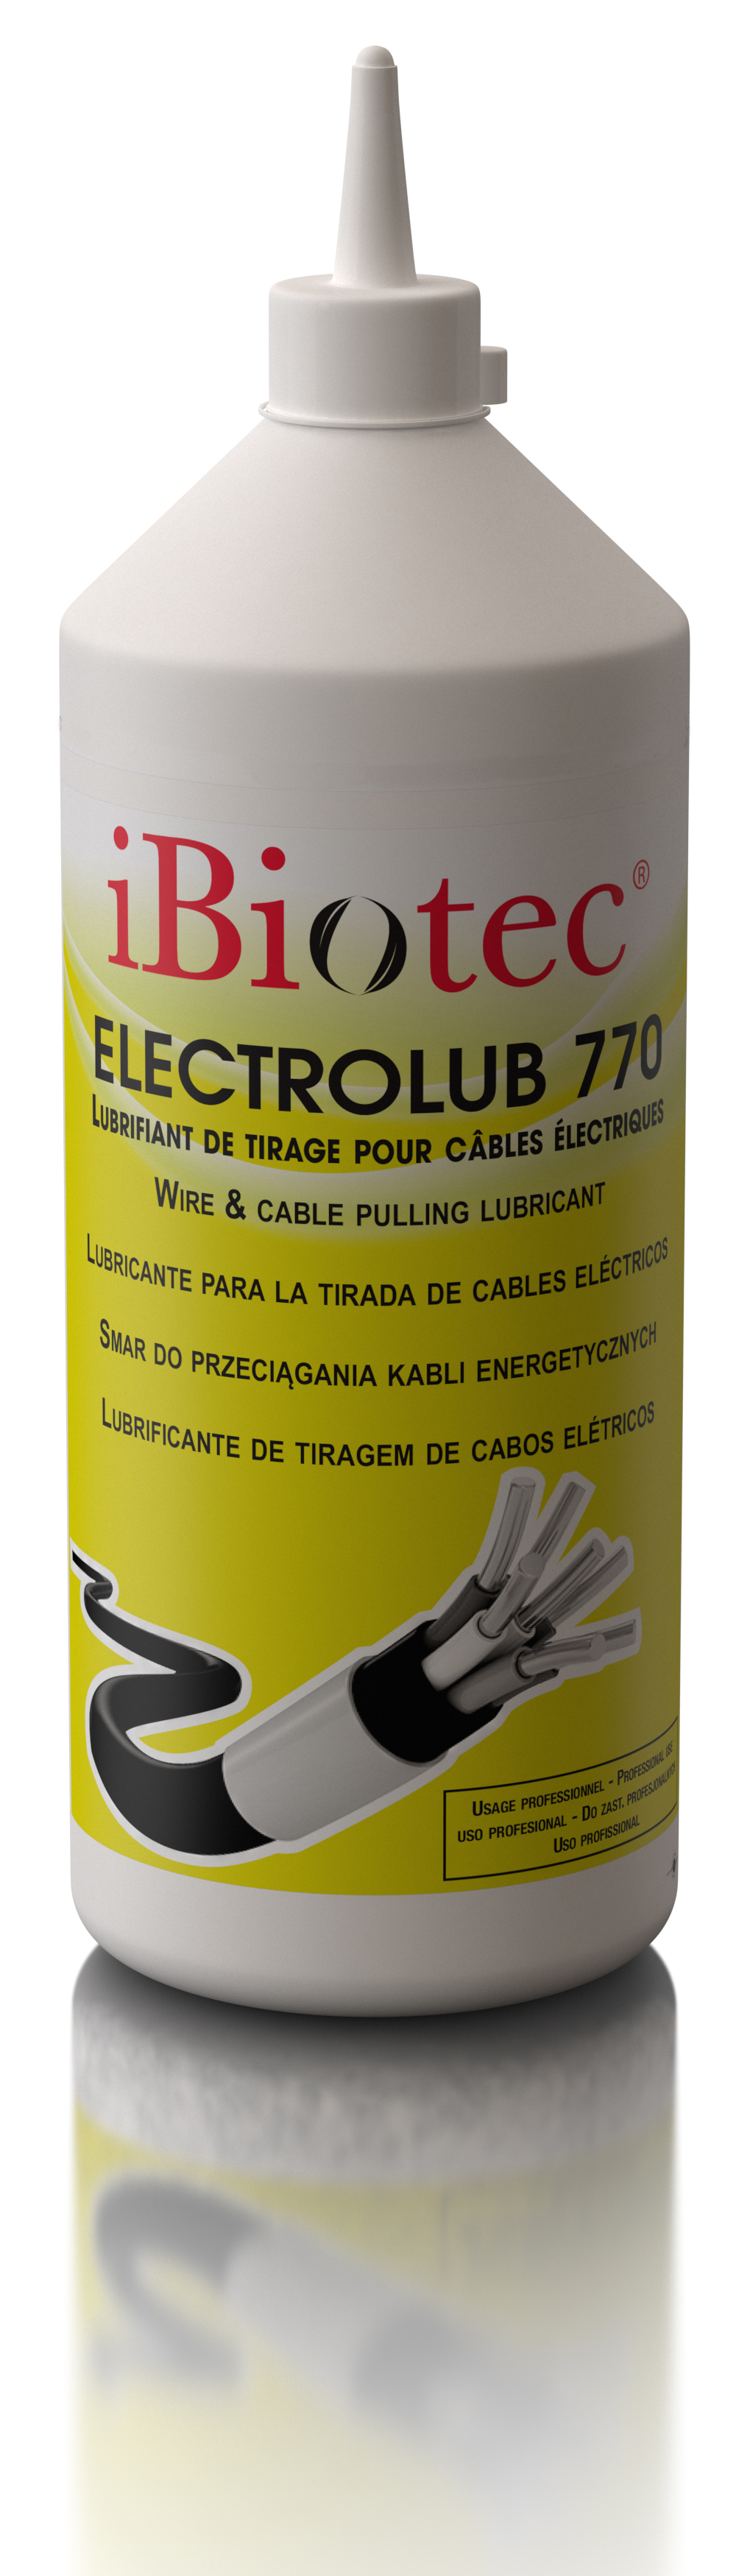 ELECTROLUB 770 Ibiotec lubricant gel, for the pulling of electrical and telecommincations cables, all ducts, sheaths and tubes. Optimum slip coefficient. Cables pulling lubricant Cables pulling gel Cables drawing paste Electrical cables drawing Electrical wires drawing Wire drawing lubricant.